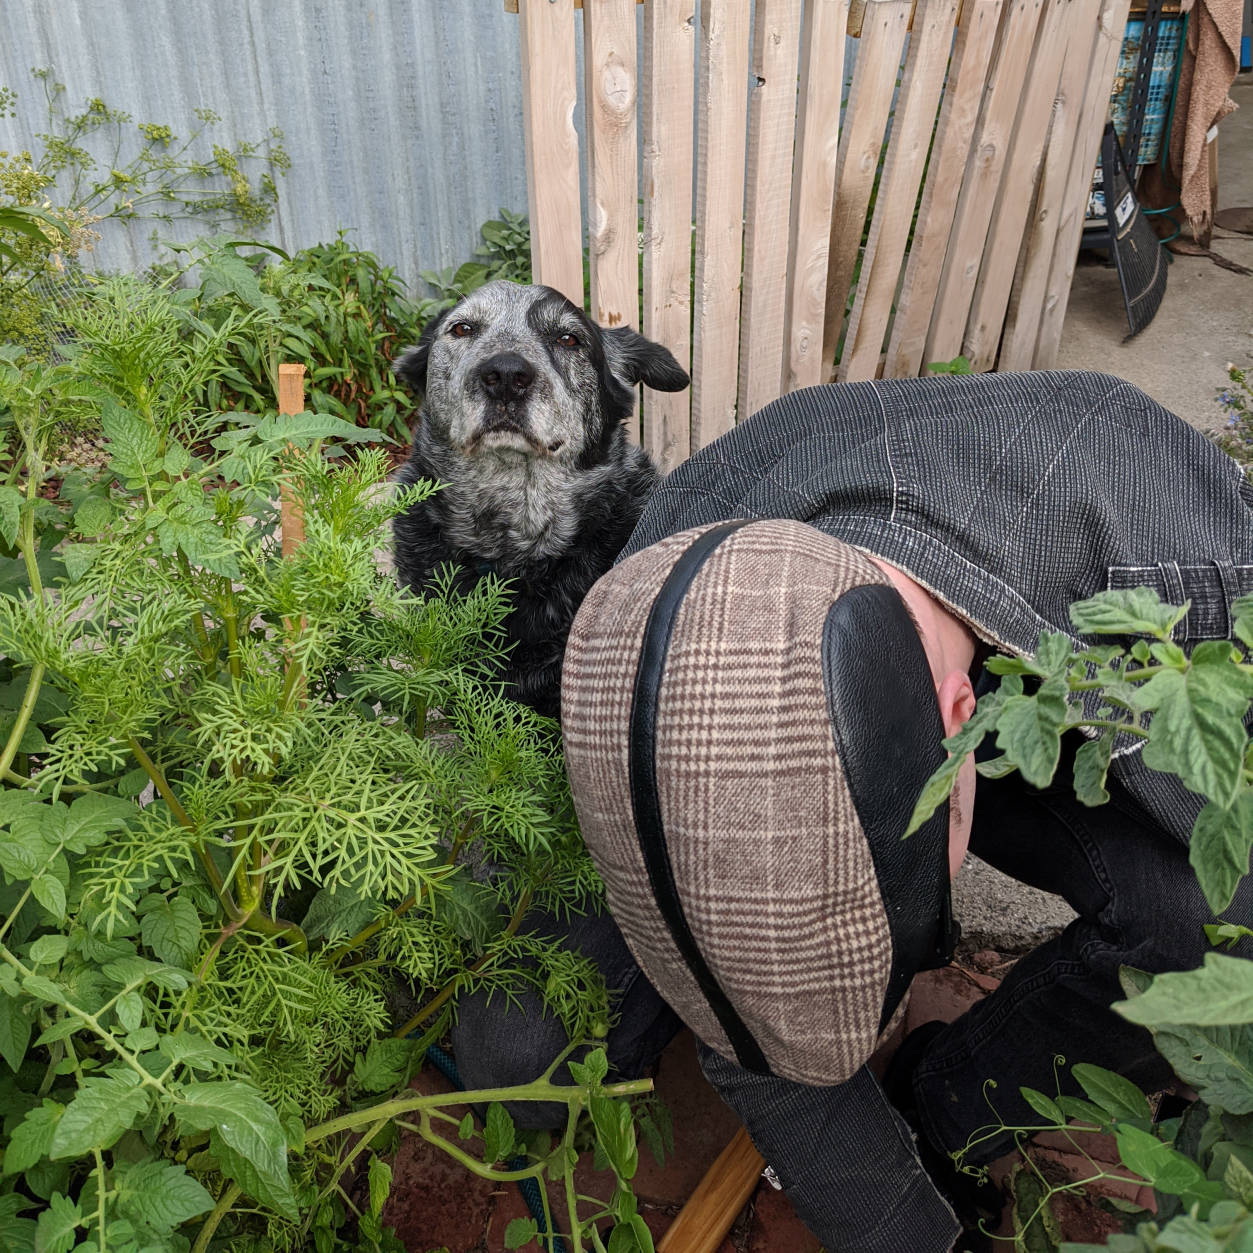 Gardening with the dog